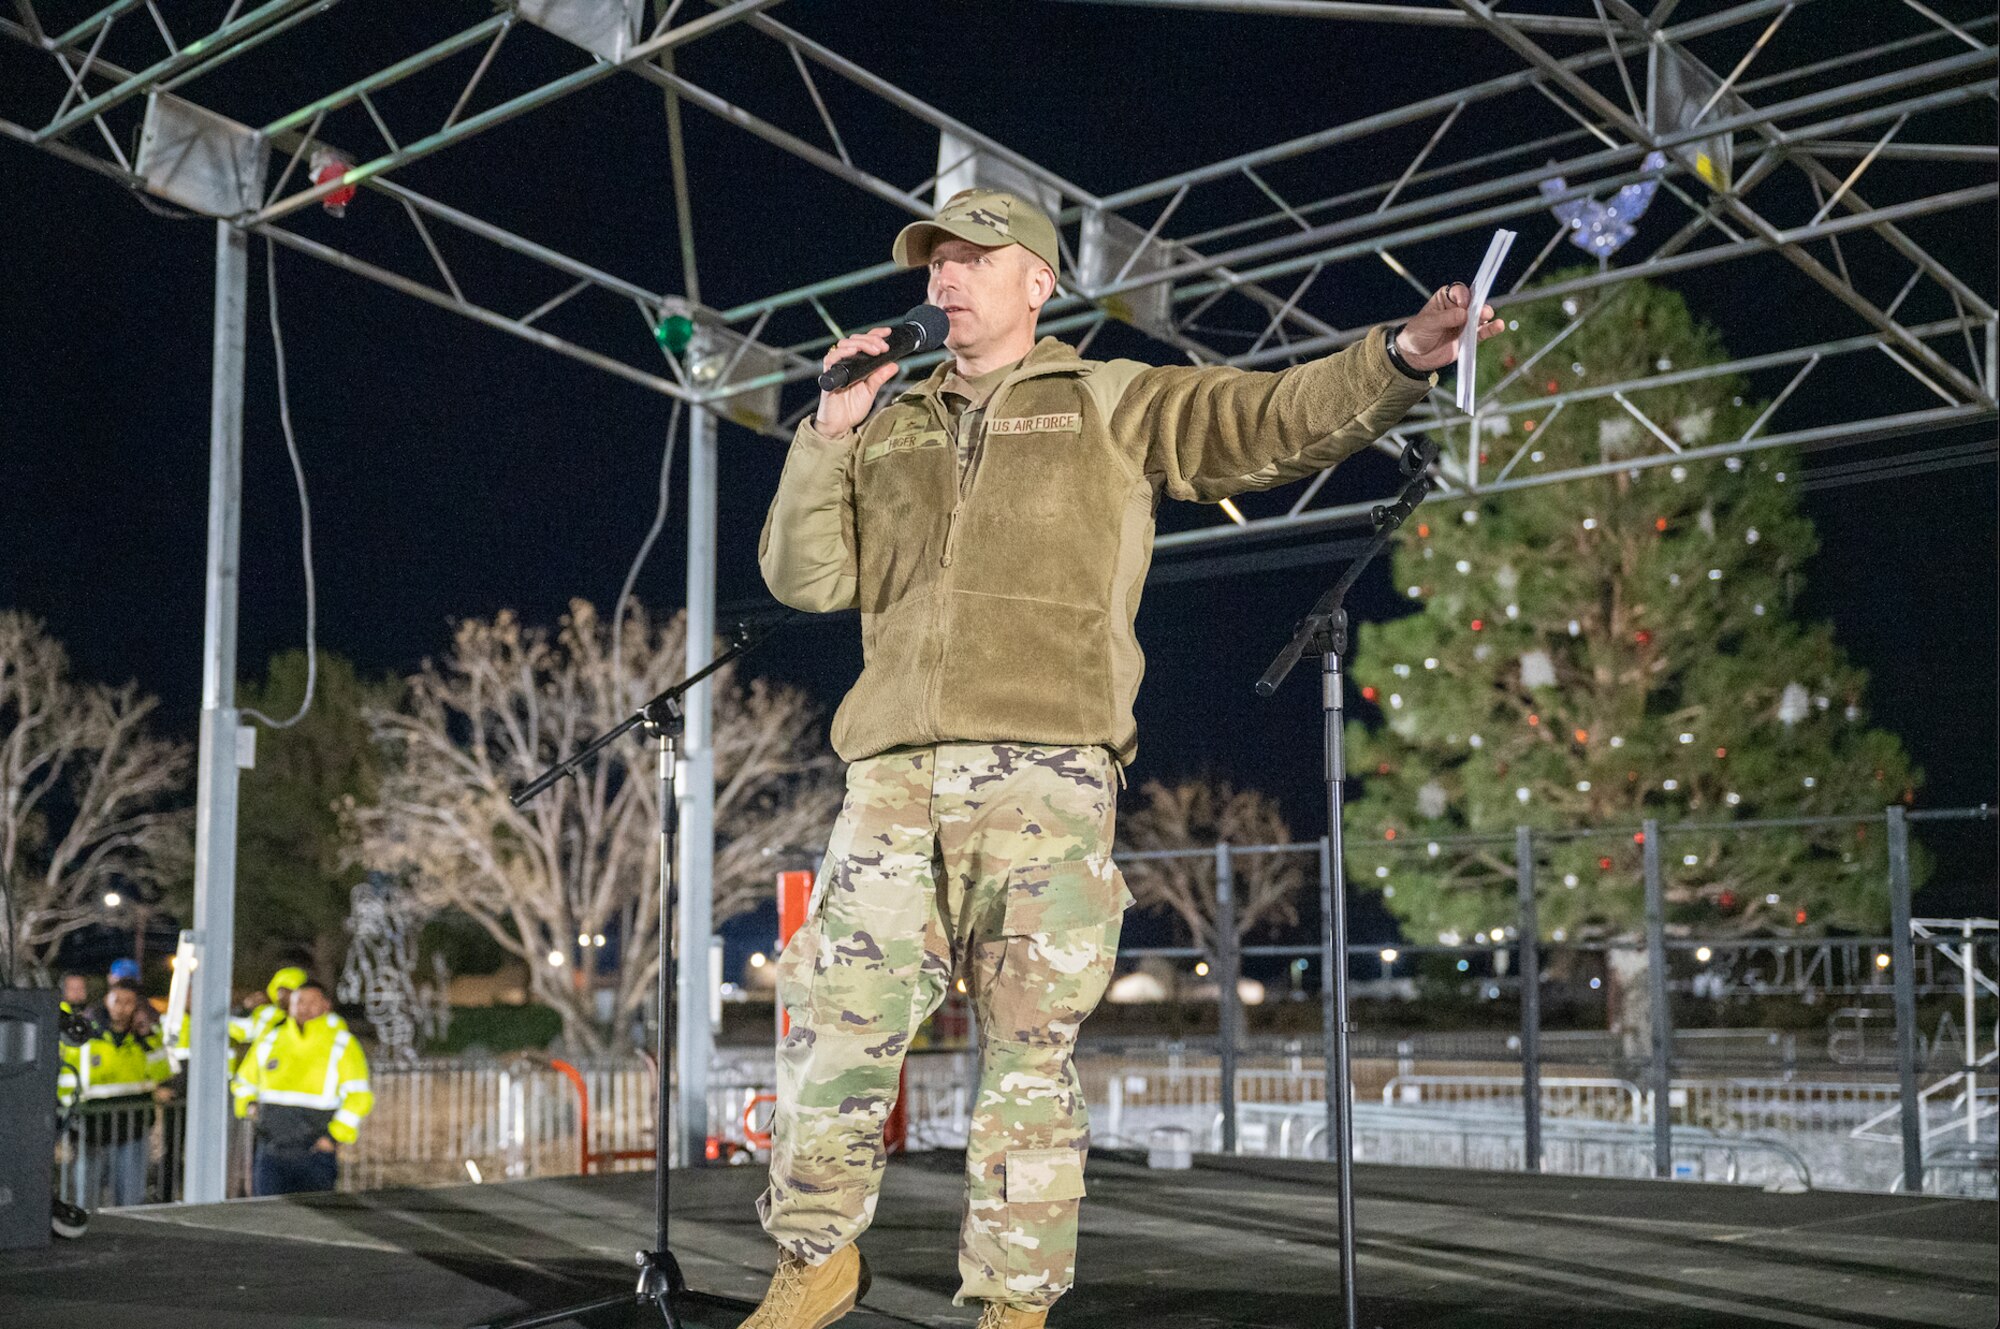 Brig. Gen. Matthew Higer, Commander, 412th Test Wing delivers remarks ahead of the tree lightning ceremony at WinterFest 2022.